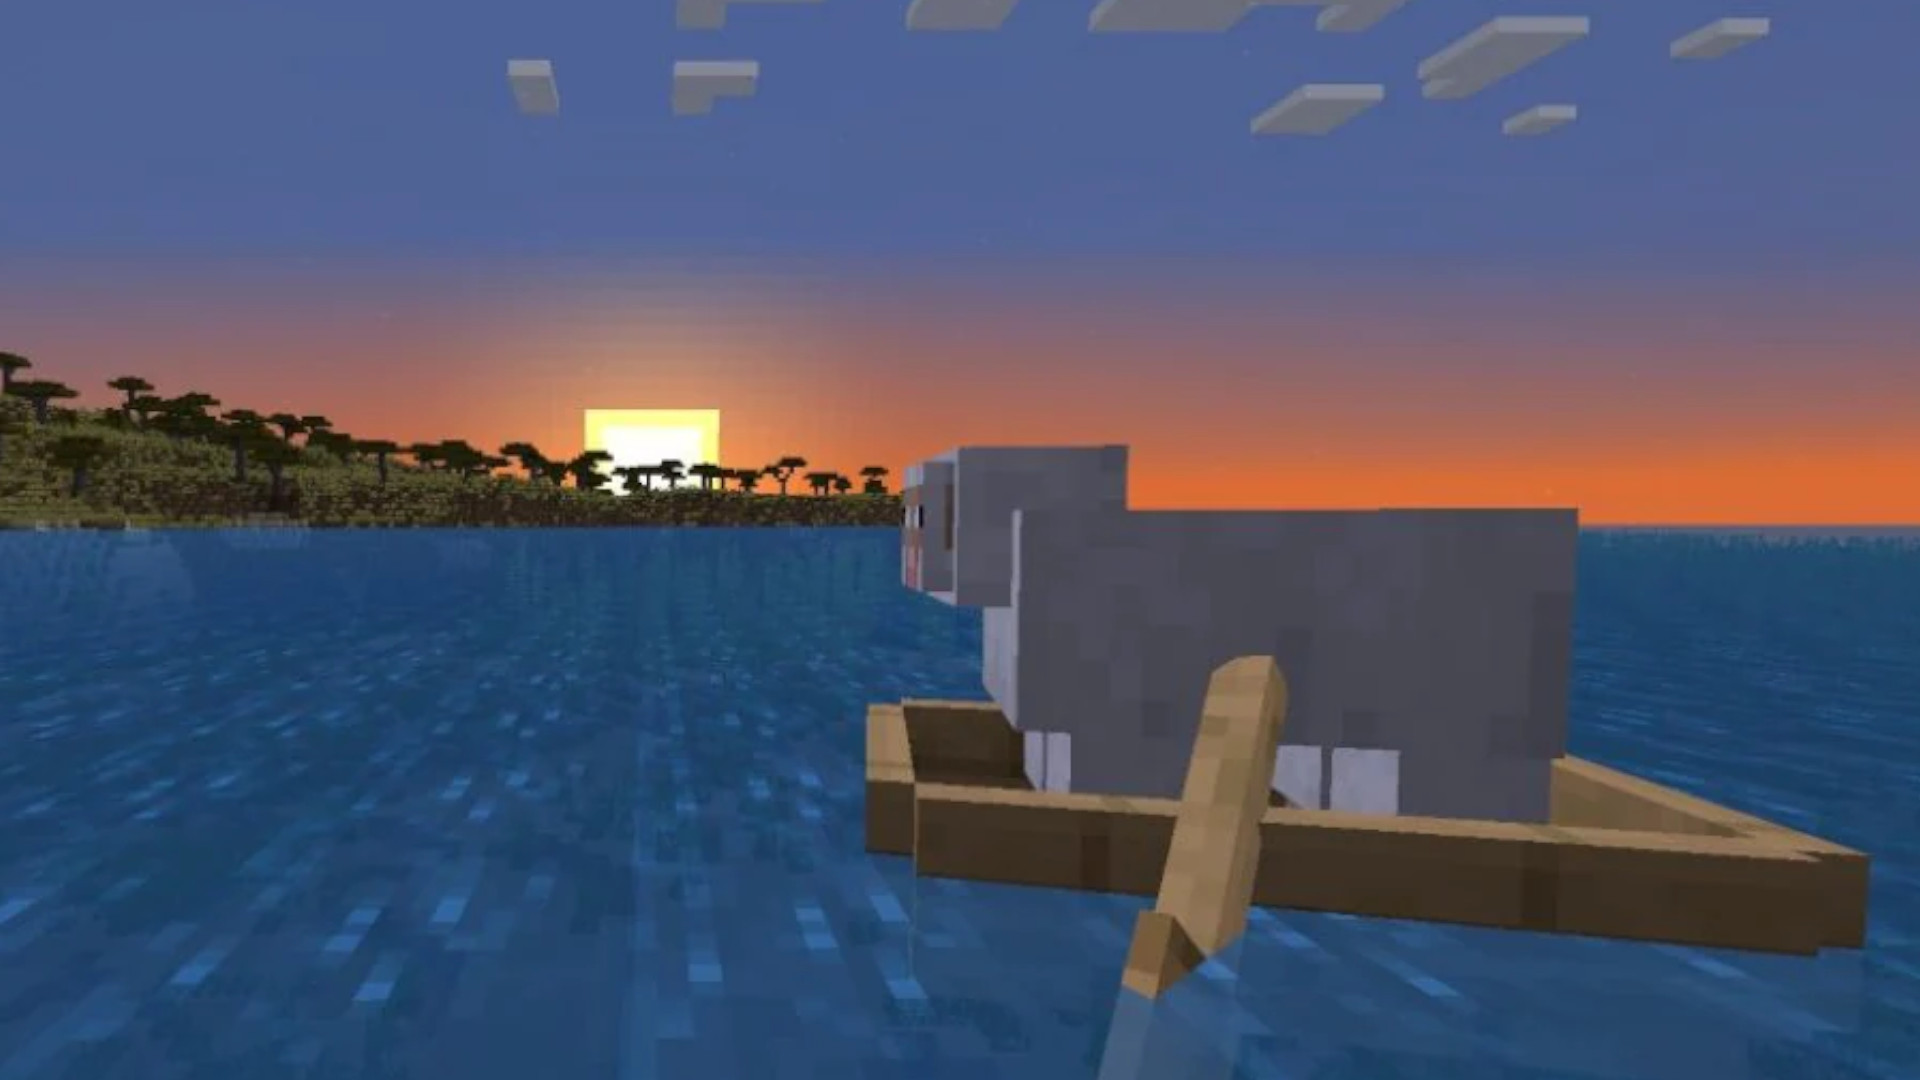 Minecraft's getting a 'place feature' command